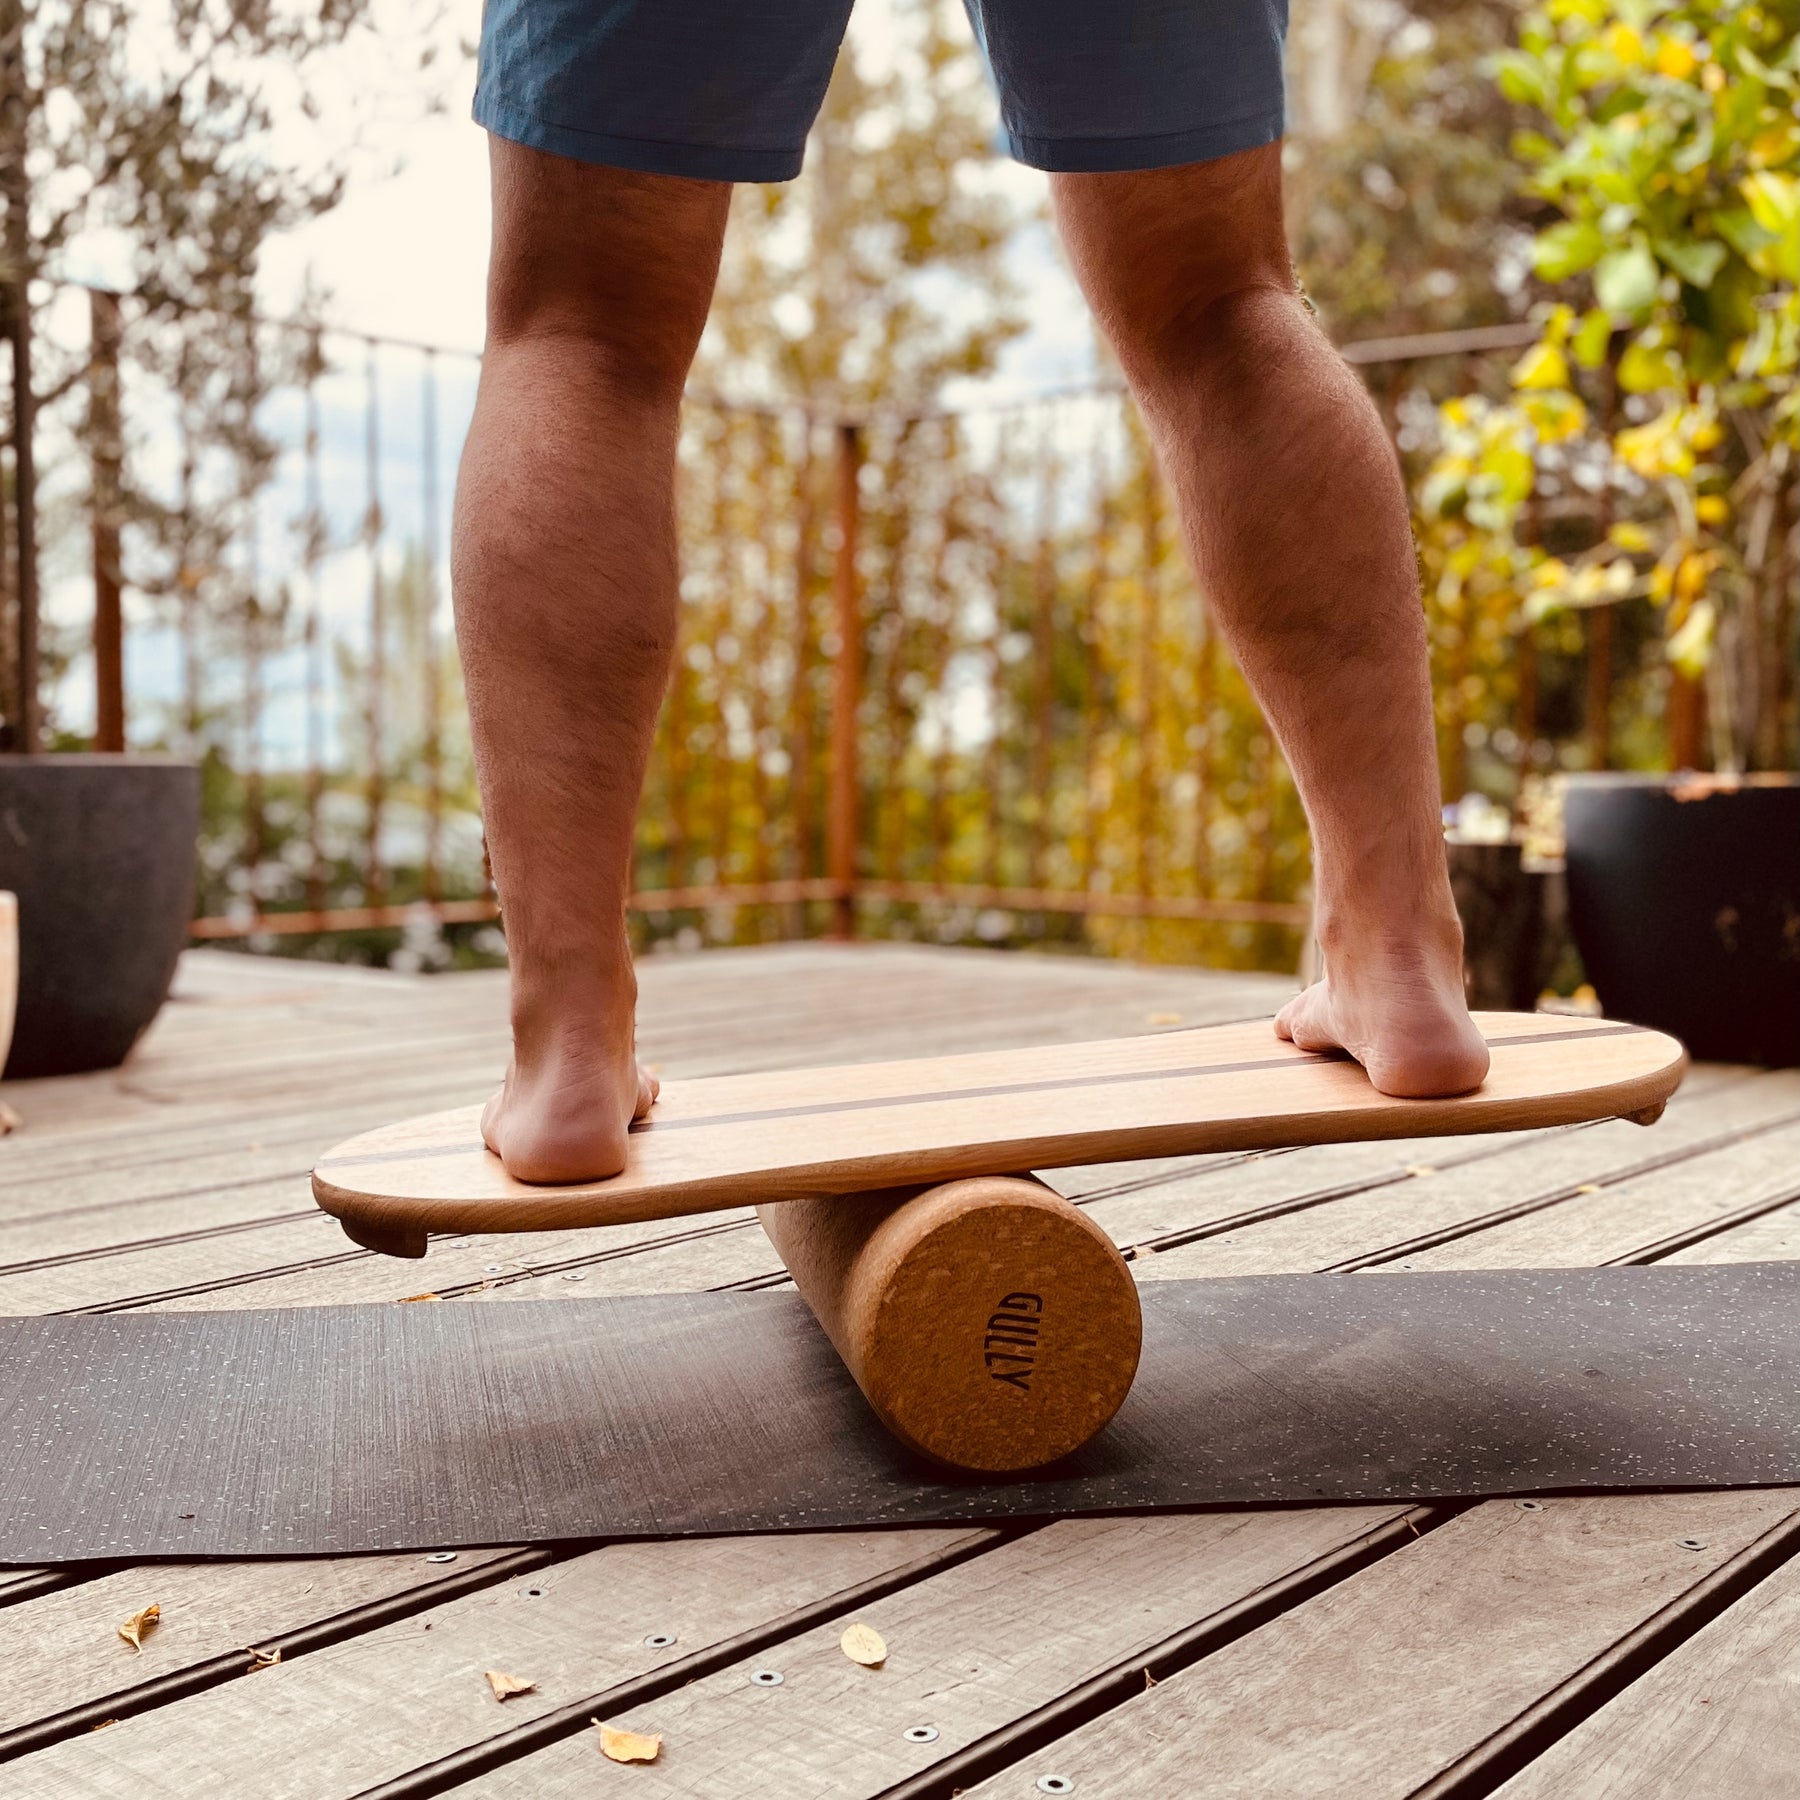 Man balancing on a handmade soild timber balance board with natural cork roller and recycled rubber mat